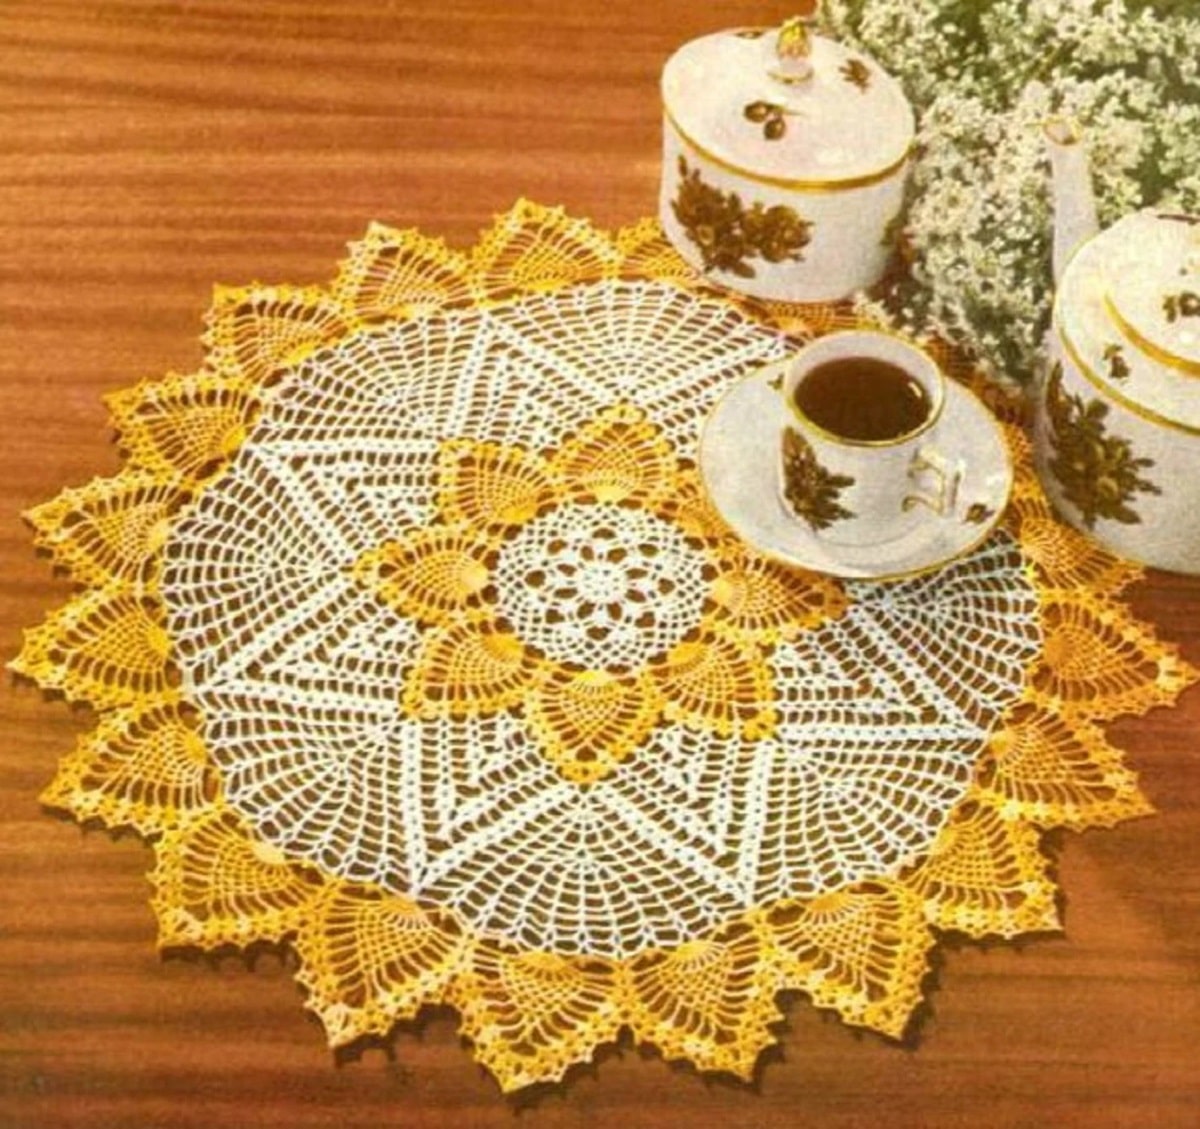  Yellow pineapples in petals in the center of this cream crochet doily, with yellow petals around the entire circle on a wooden table.